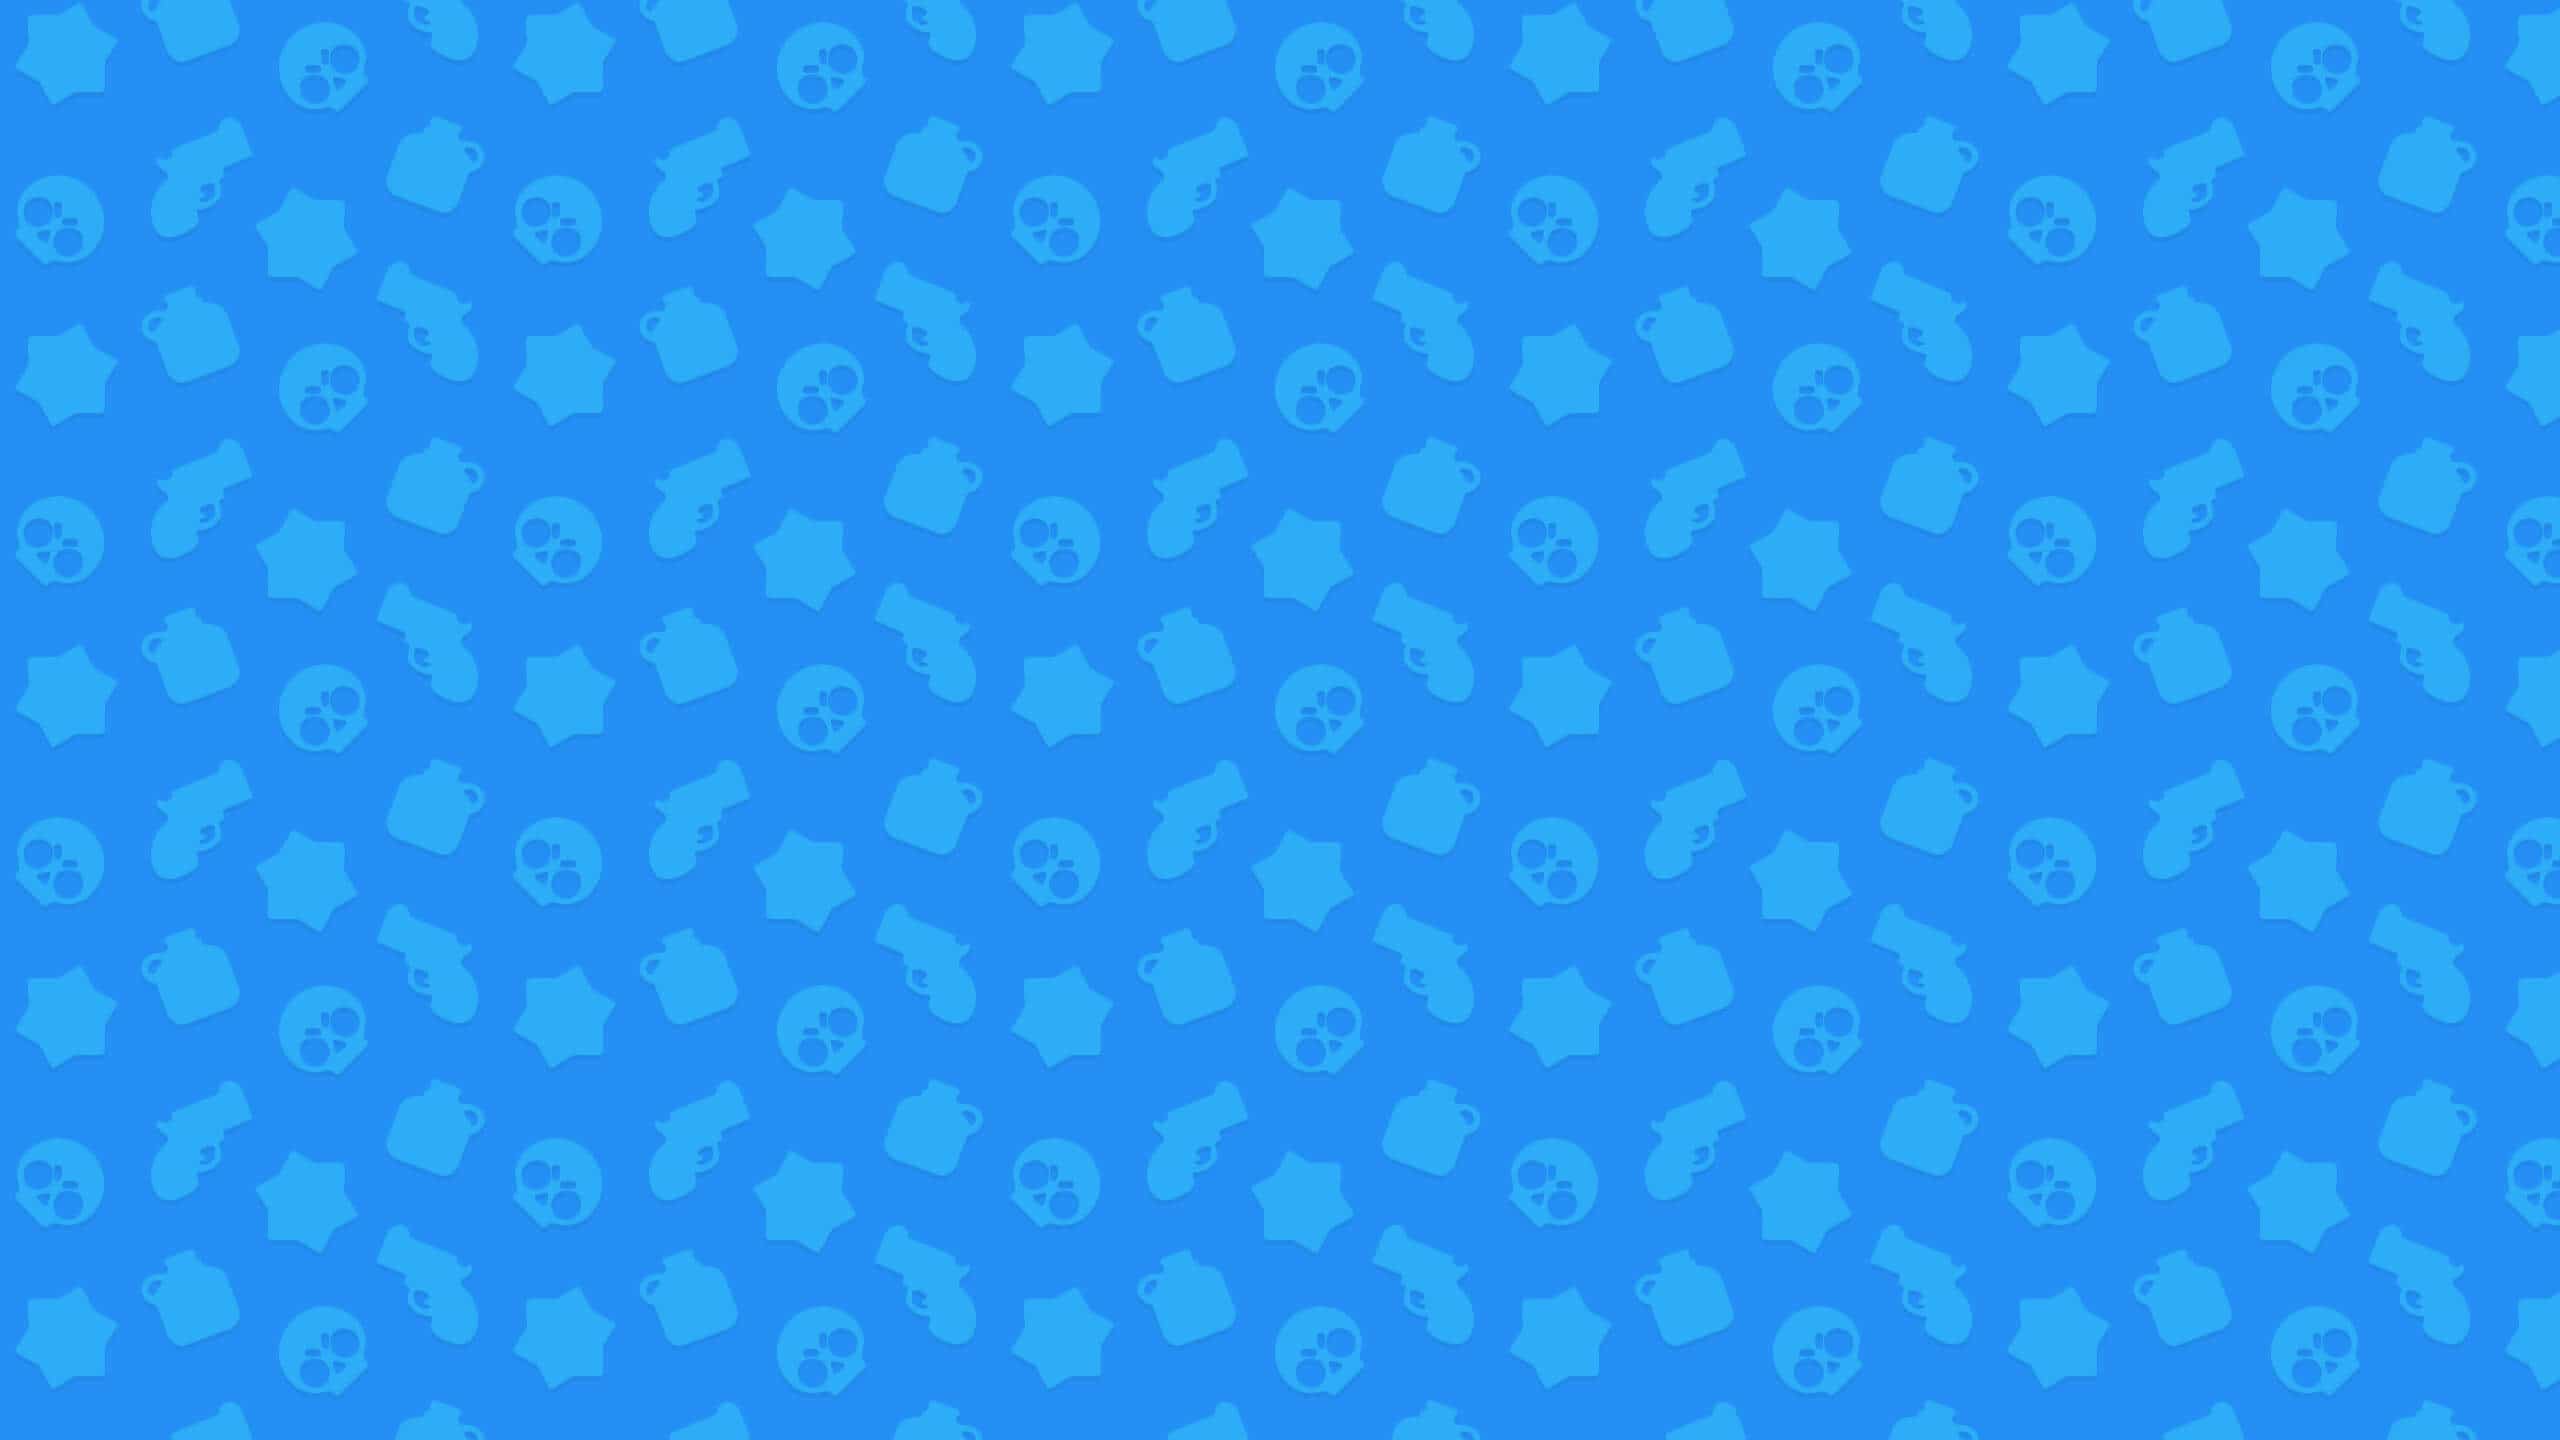 Brawl Stars Video Overlay and Tileable Pattern